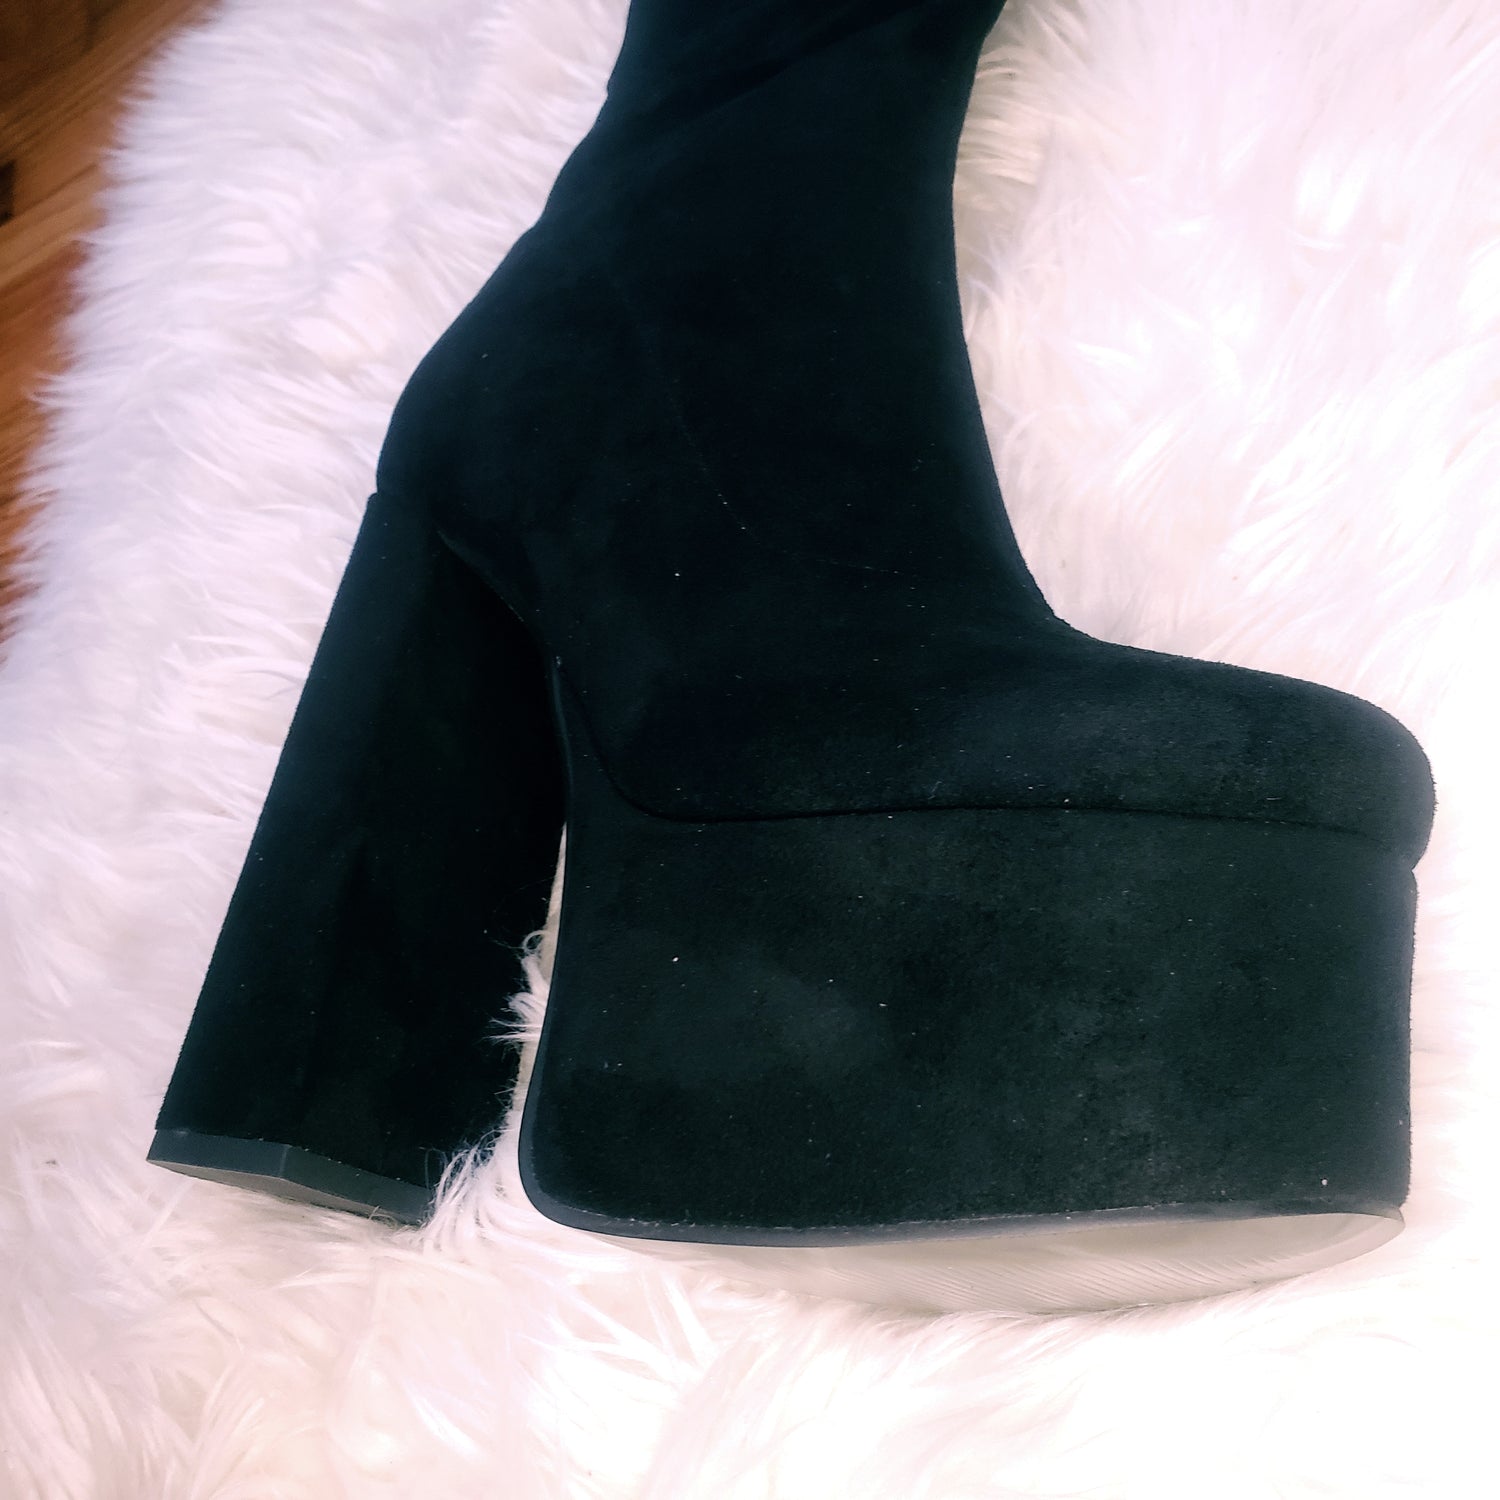 Black suede retro chunky platform boots. Round toe and block heel give it a 60's and 70's inspired twist. Knee high suede boots. 